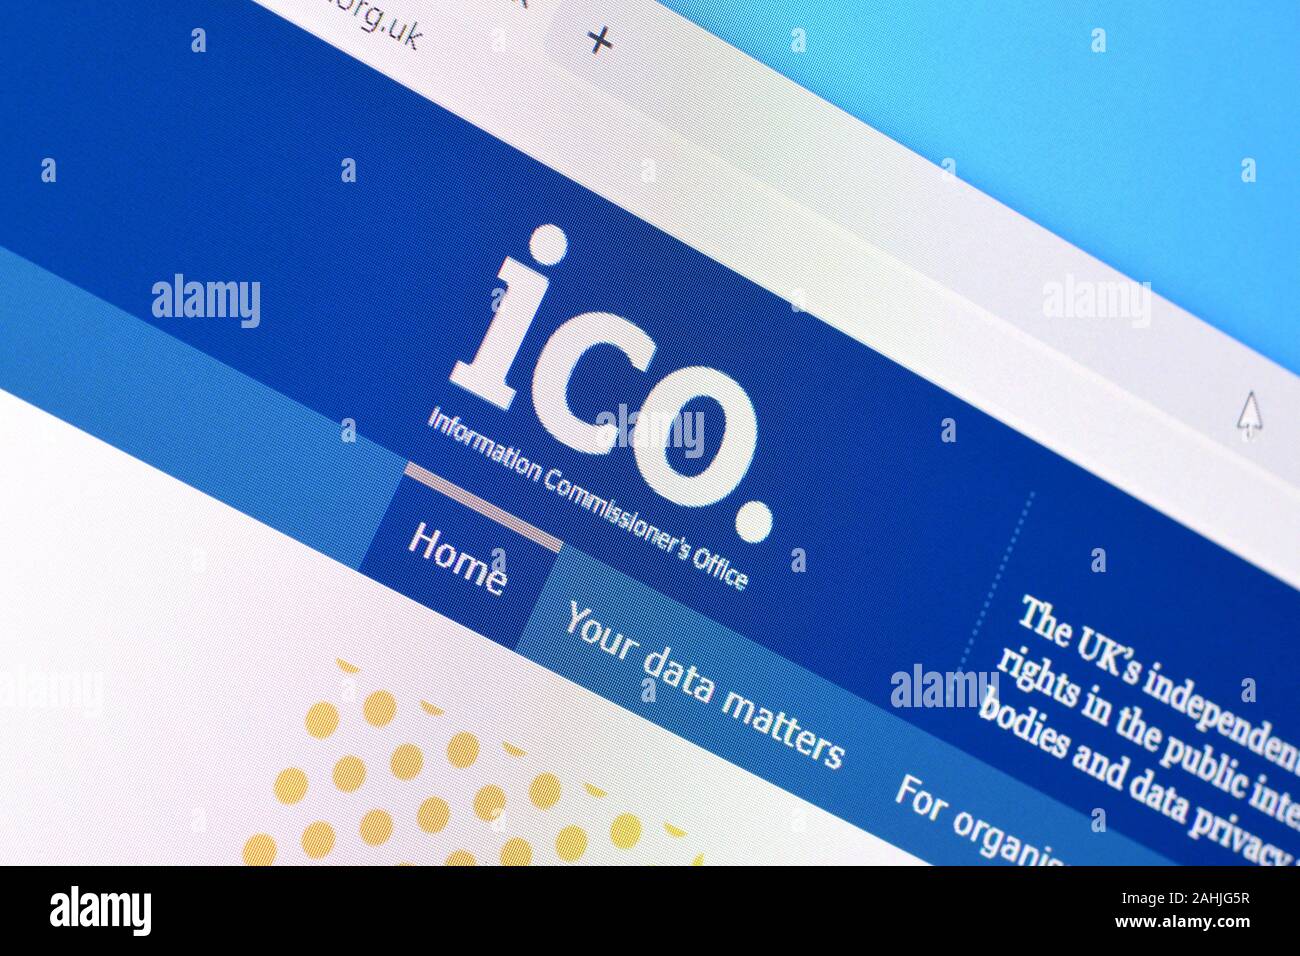 NY, USA - DECEMBER 16, 2019: Homepage of ico org website on the display of PC, url - ico.org.uk. Stock Photo